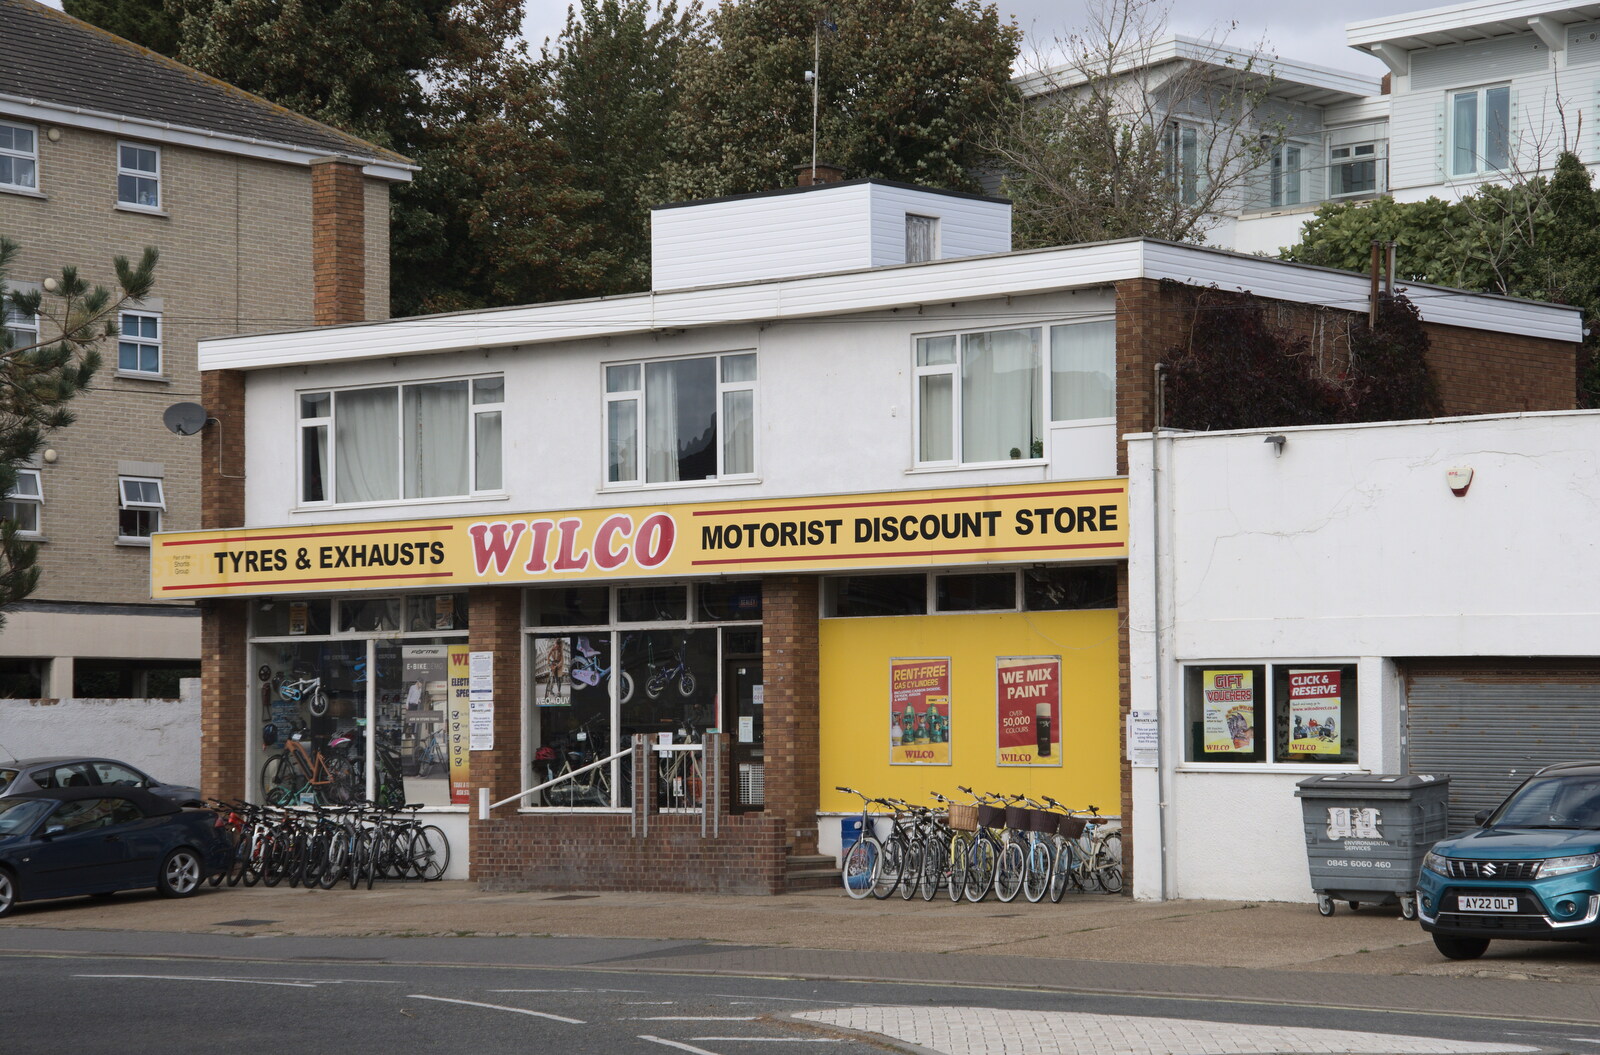 A Postcard from Felixstowe, Suffolk - 5th October 2022: A 1970s classic Wilco motorist discount store